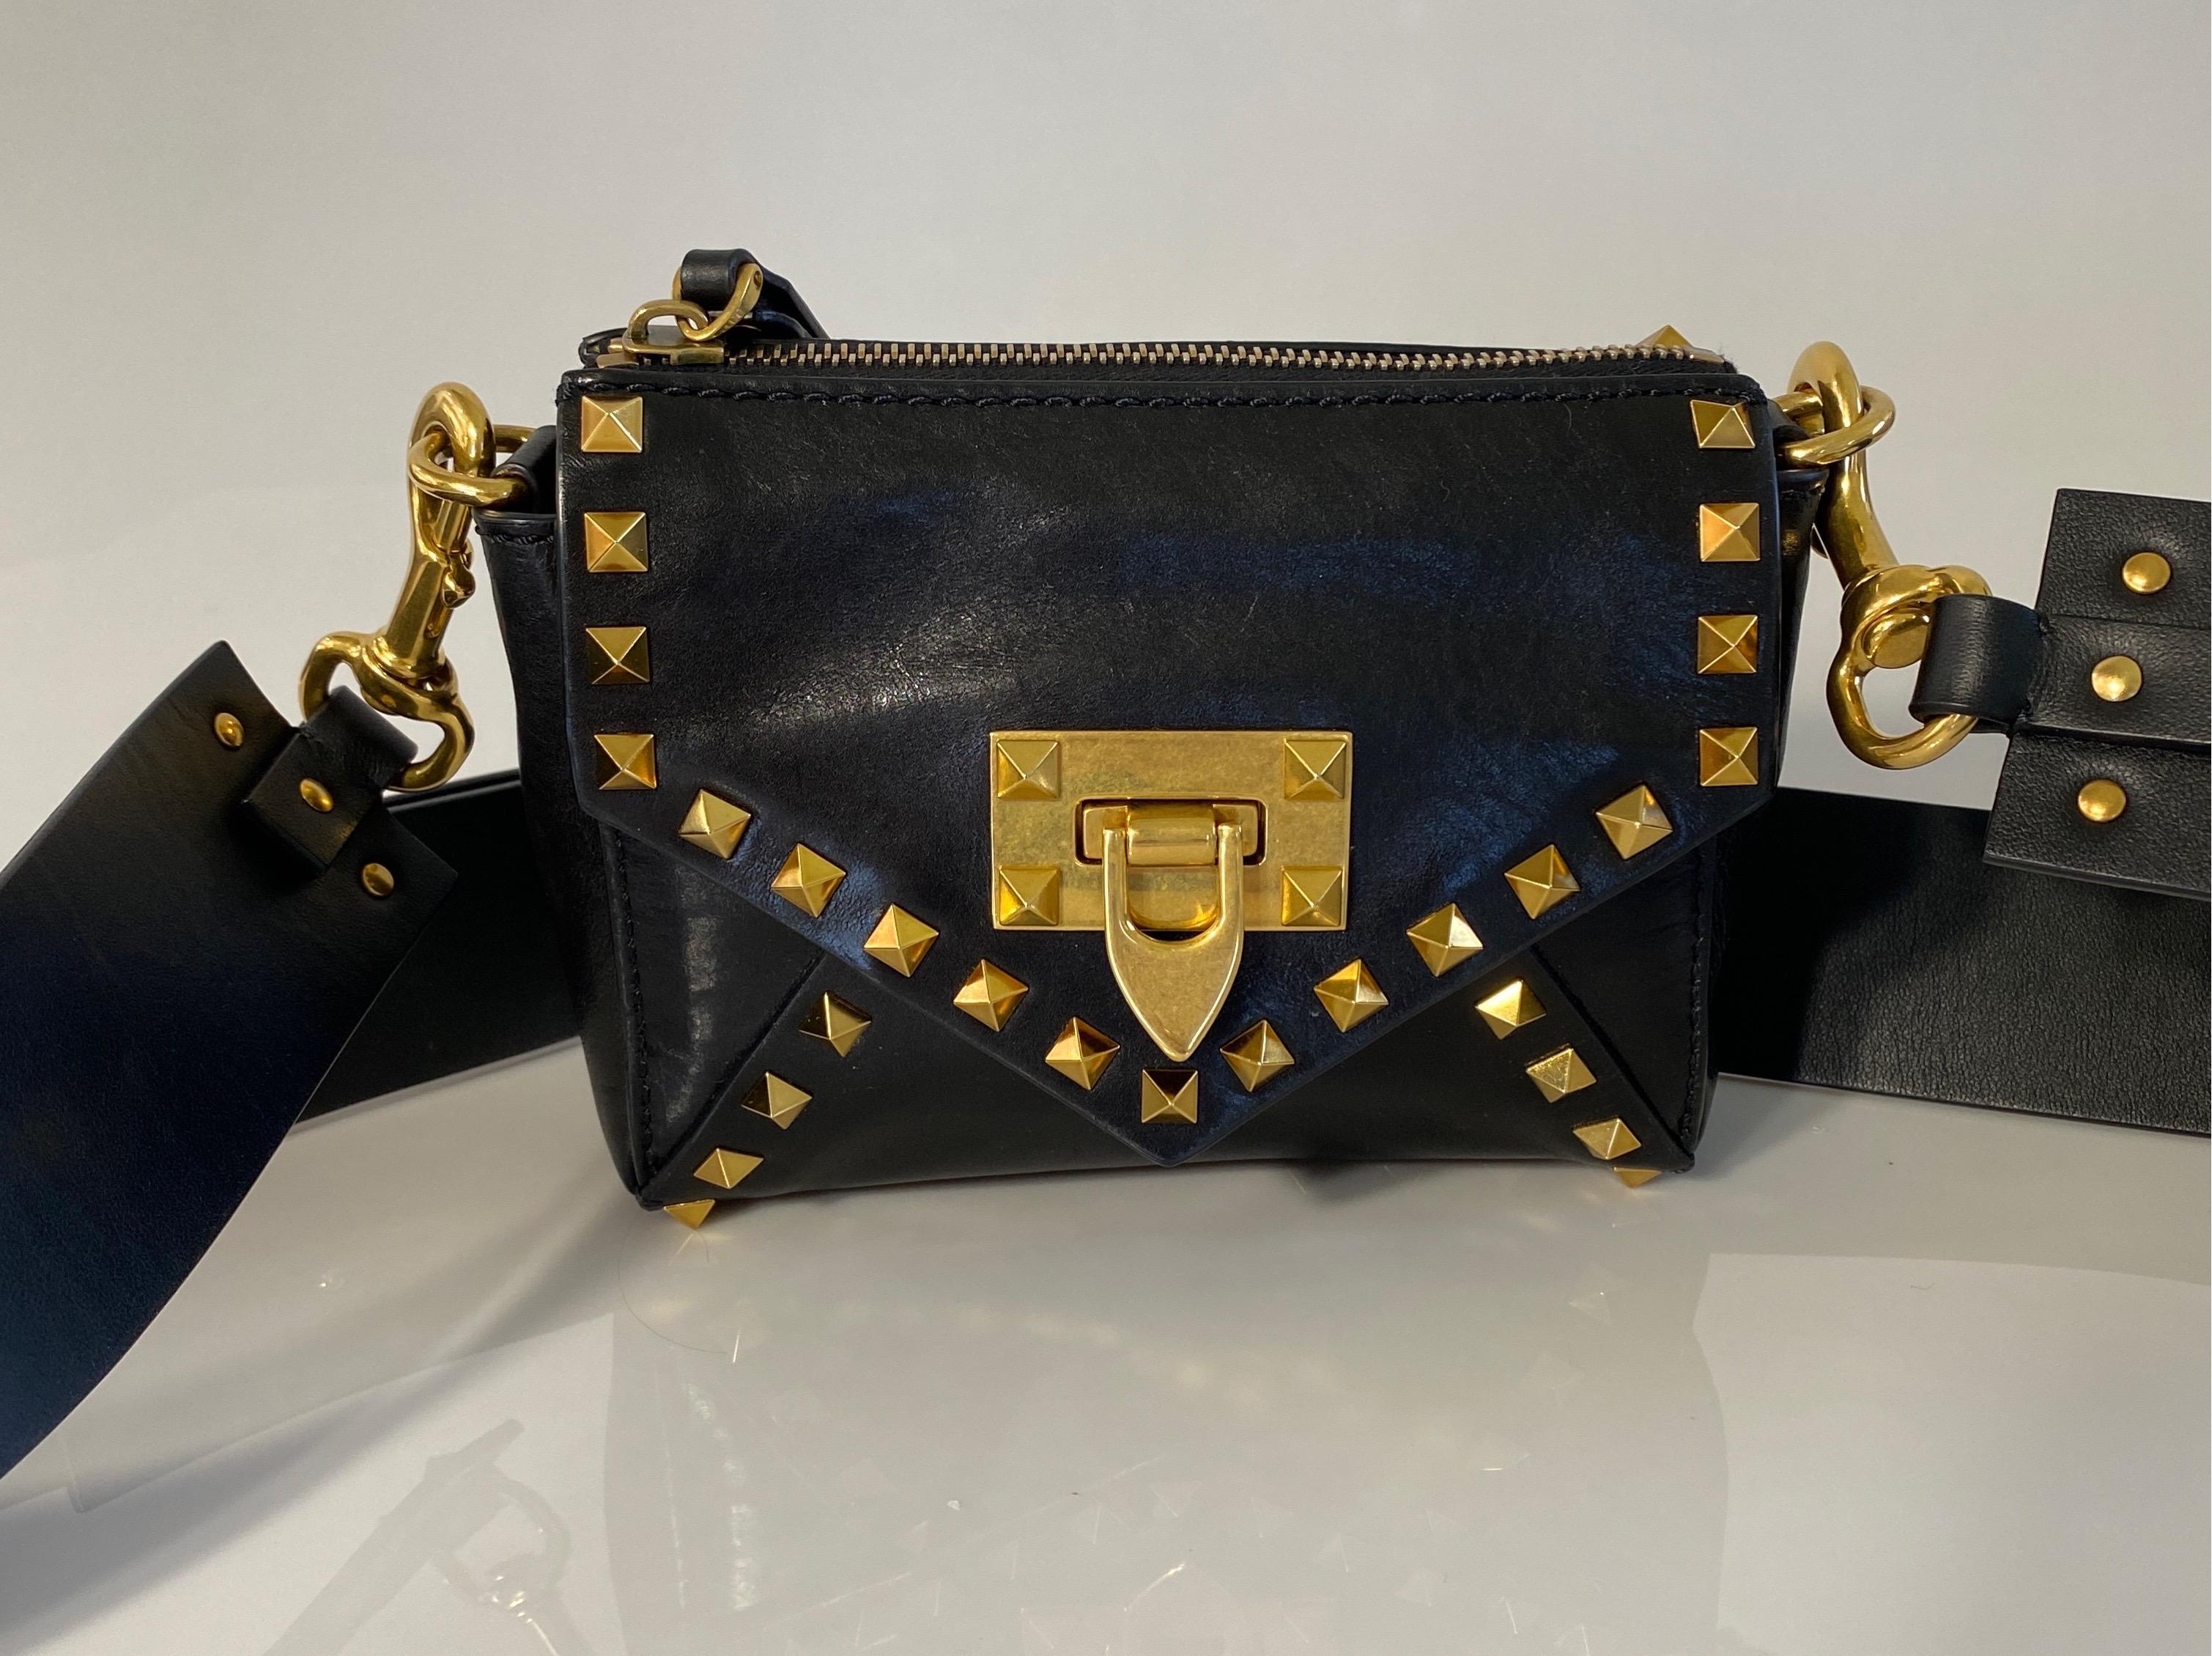 Valentino Black Small Rock Stud Calf Leather Crossbody Bag with Wide Strap 1